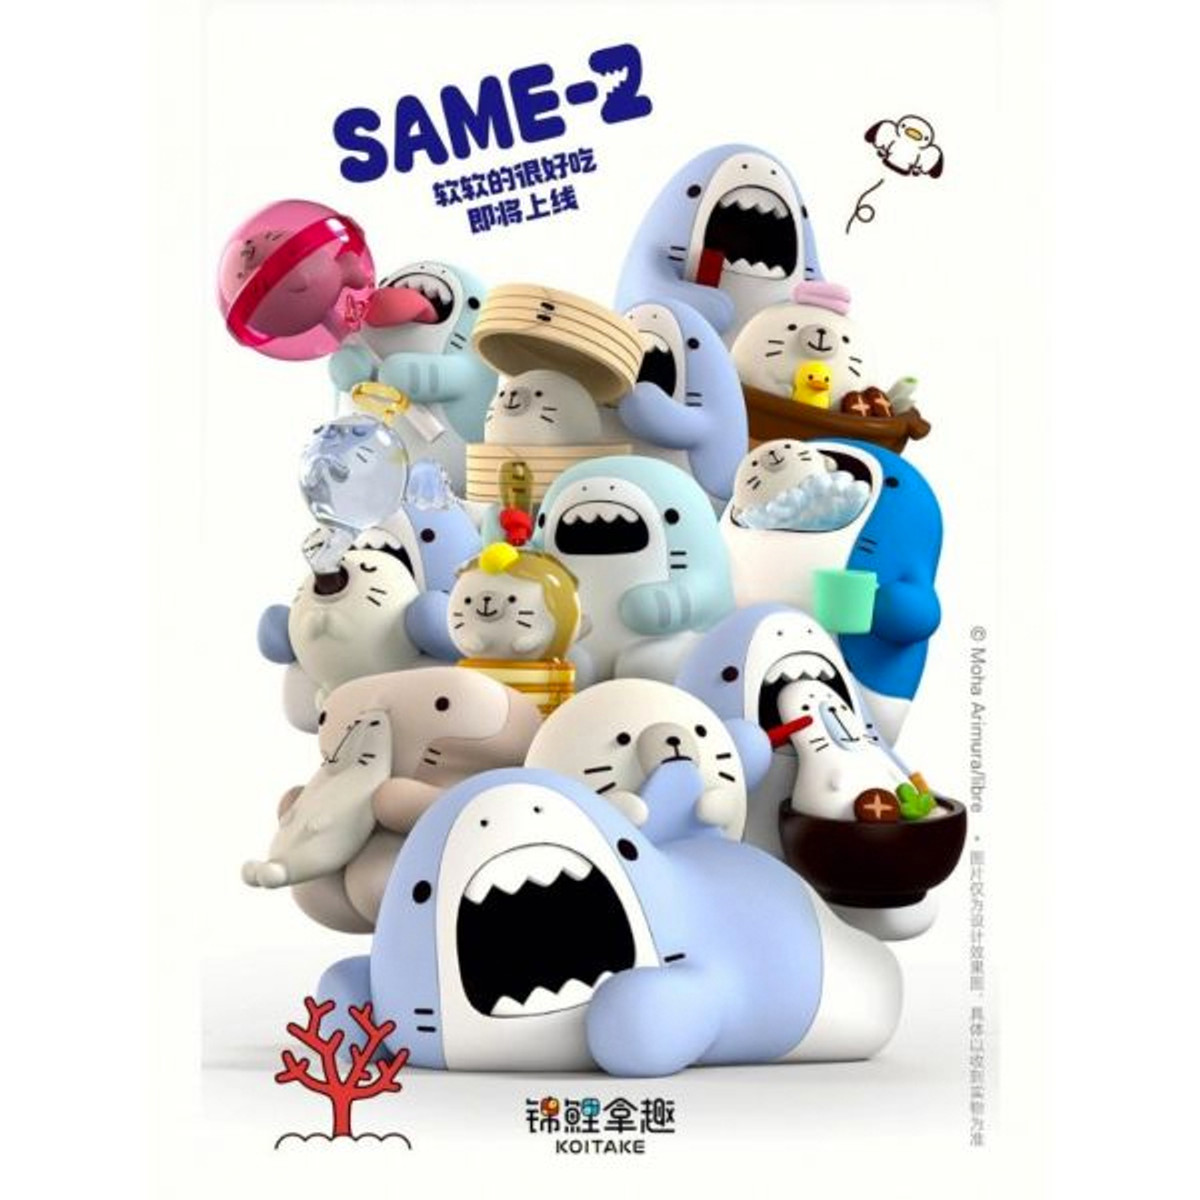 SAME-Z - Shark King And Seal King Soft And Delicious Blind Box Series